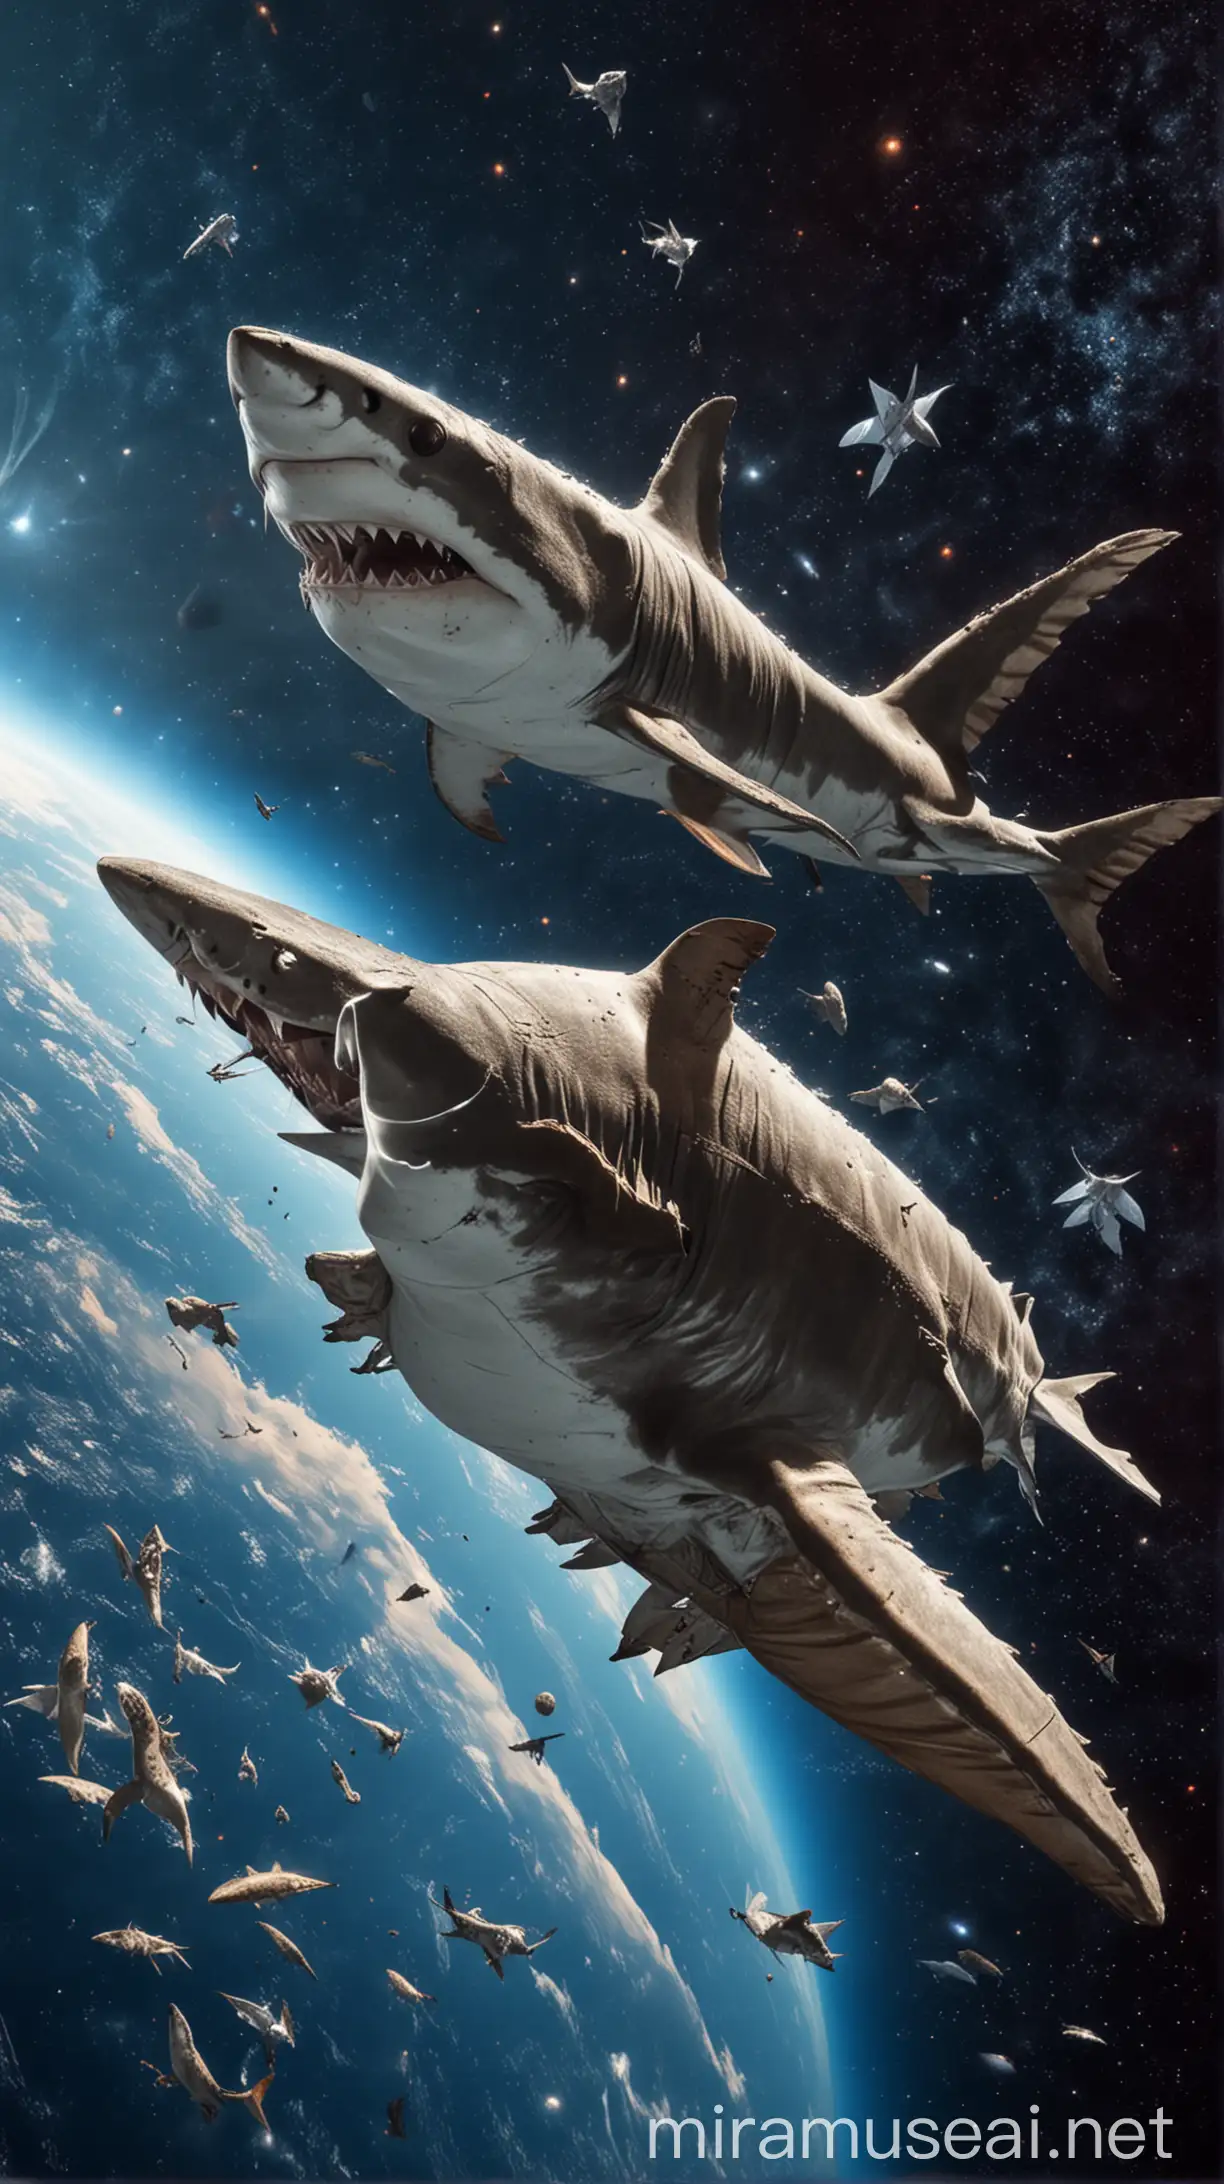 Shark Flying in Space with Wings Extraterrestrial Adventure Illustration